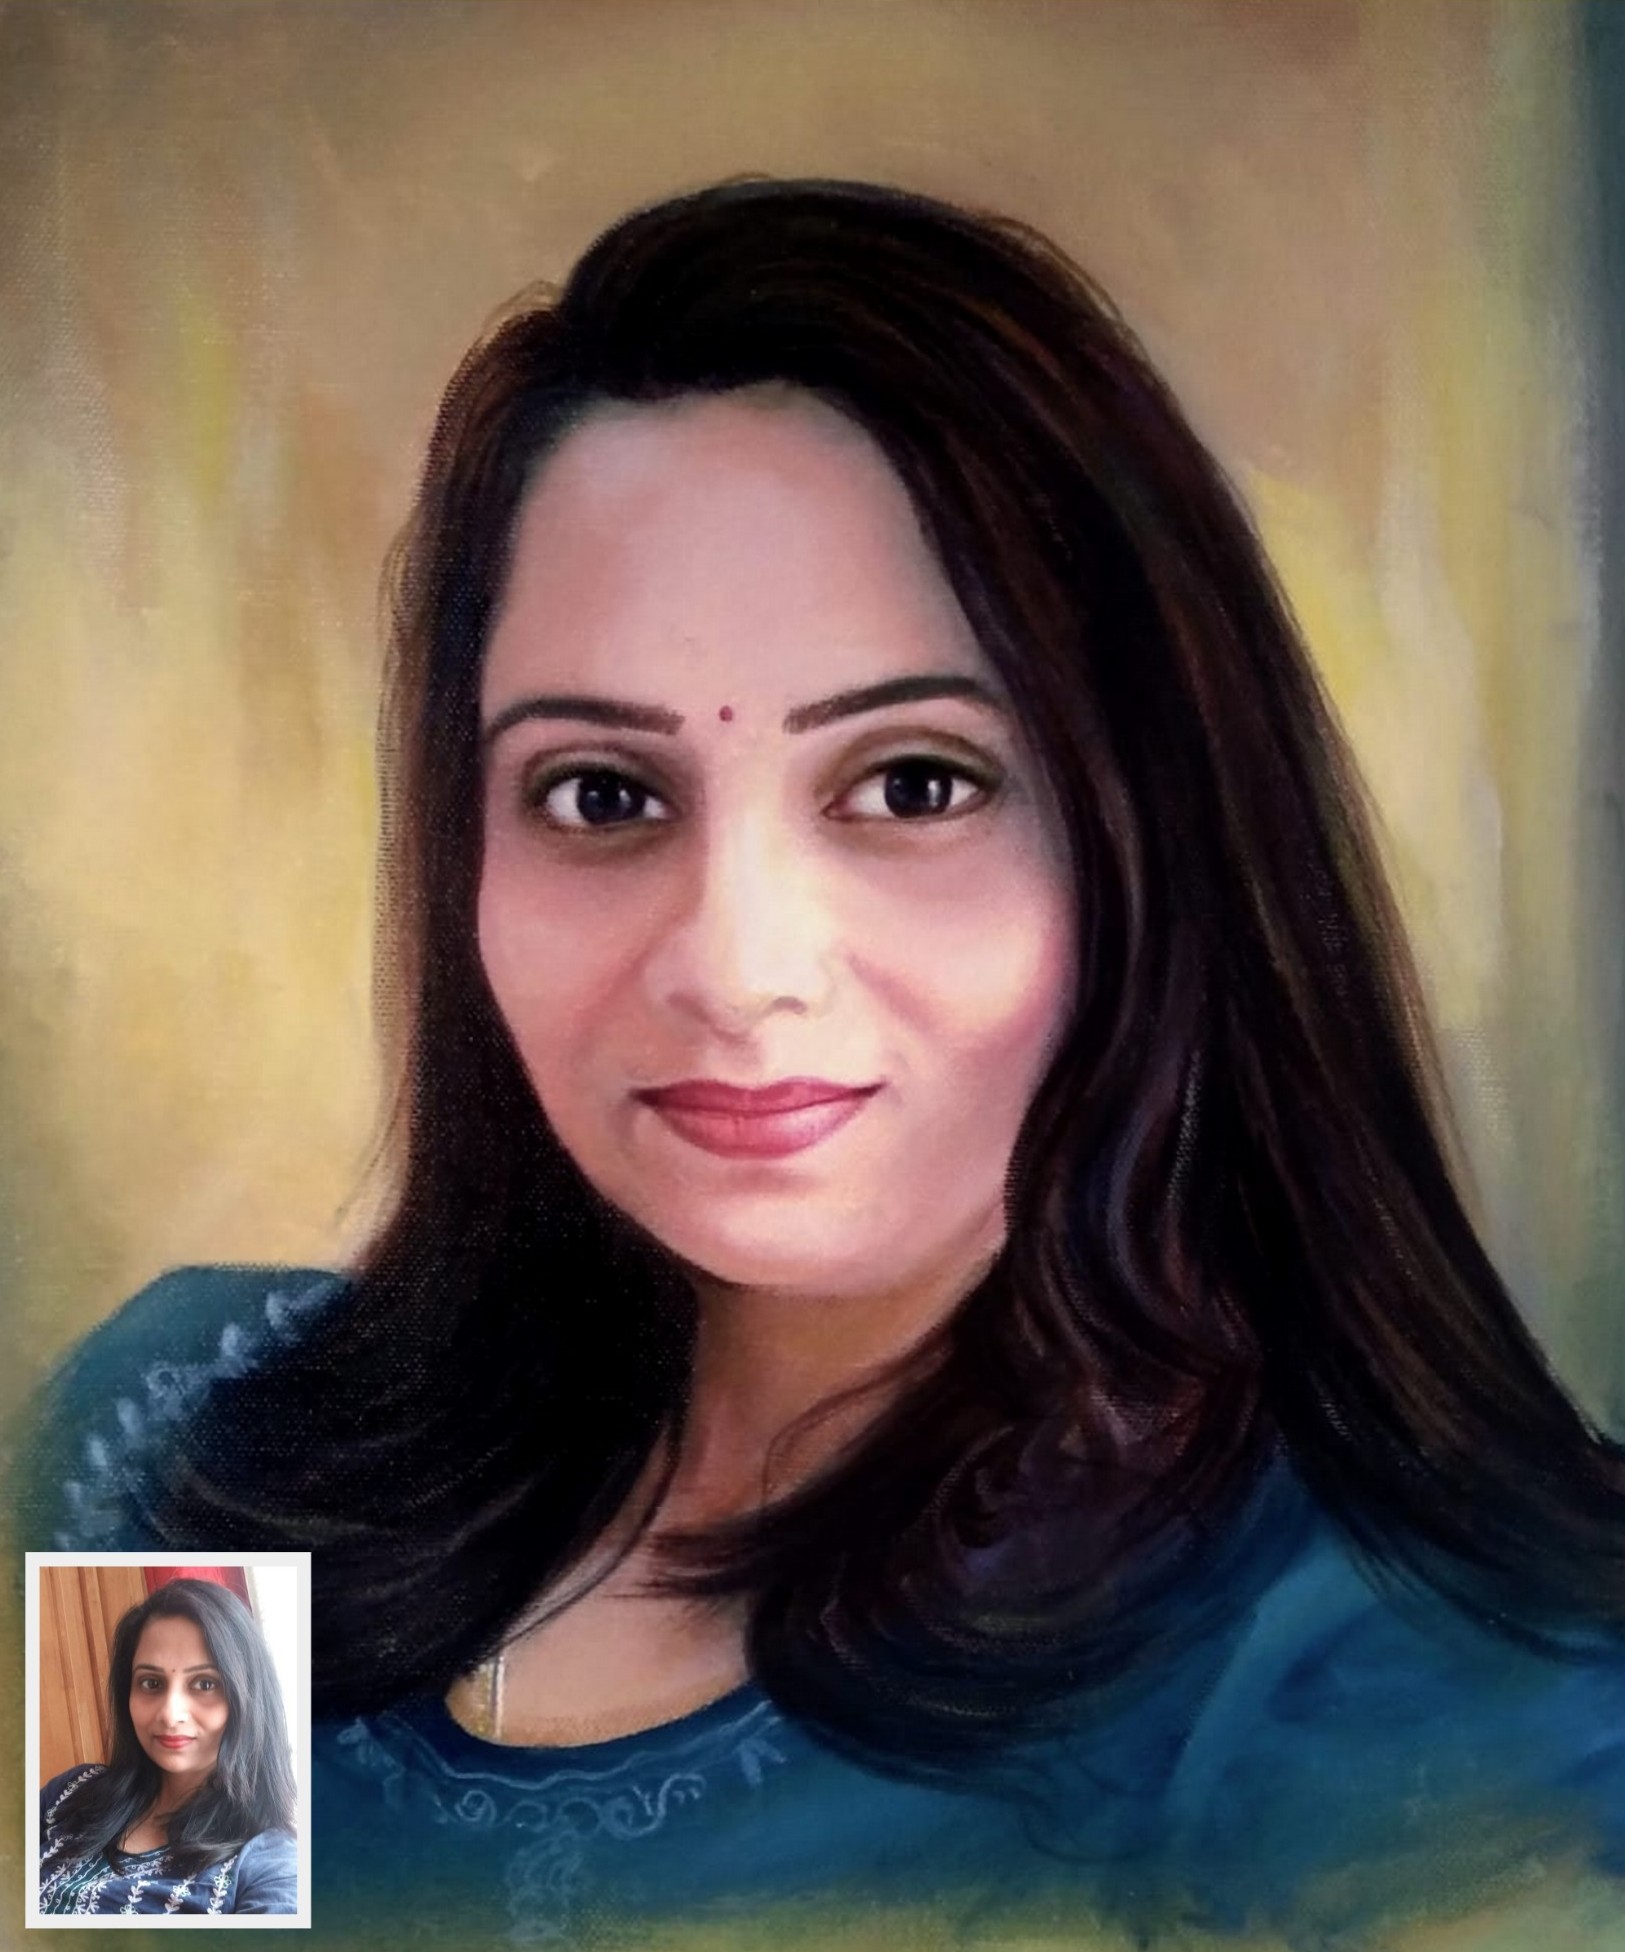 painting for mother, photo to painting gift,  birthday painting, portrait gifts,  birthday portrait